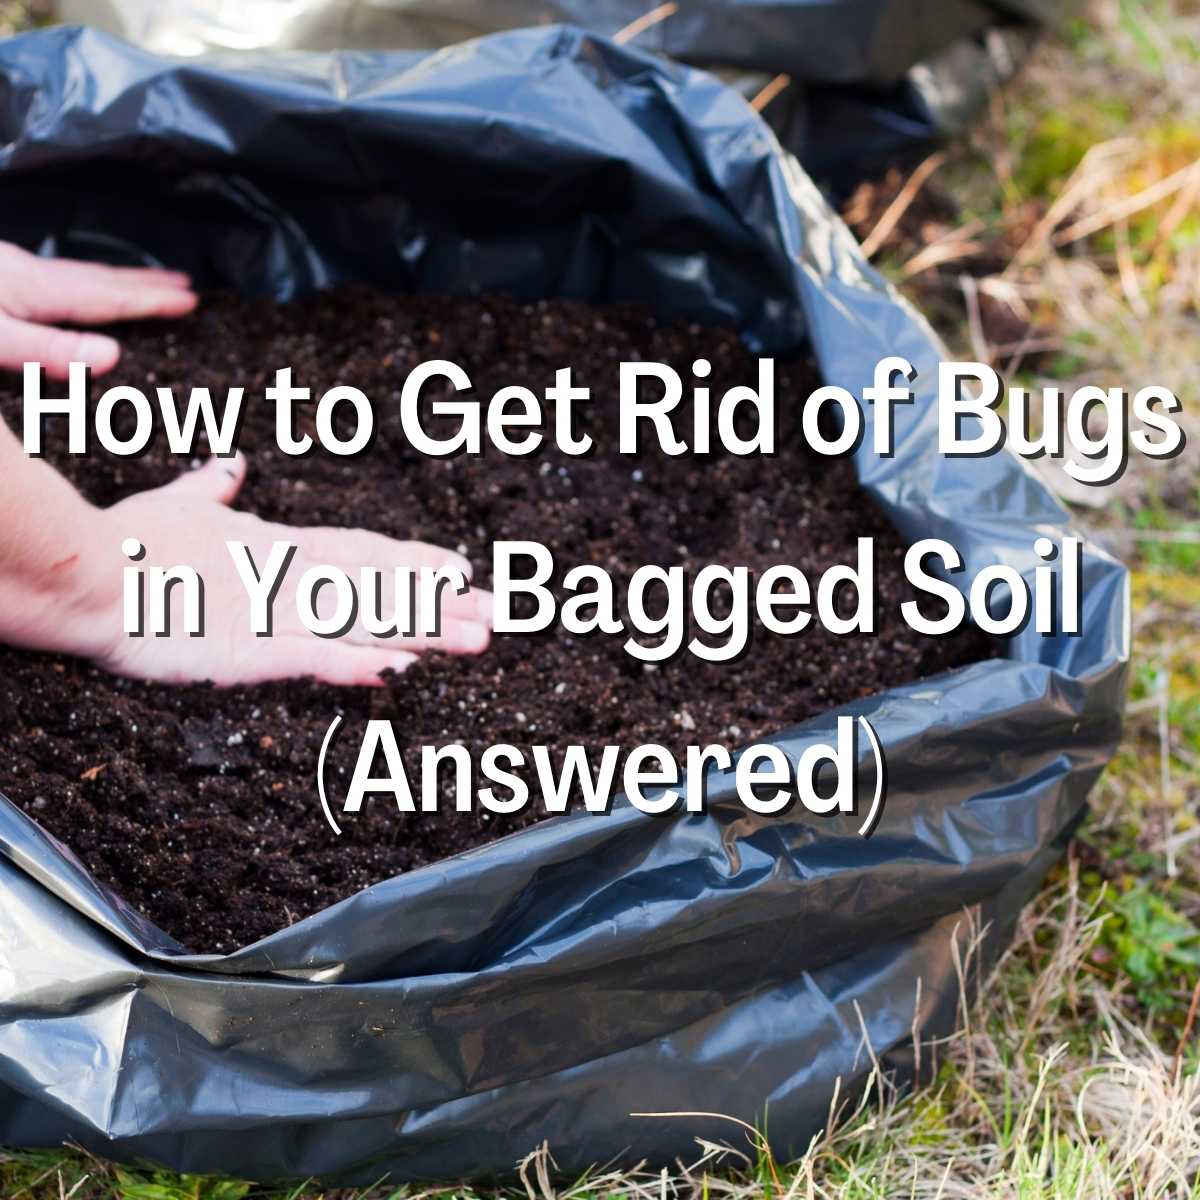 How to Get Rid of Bugs in Your Bagged Soil